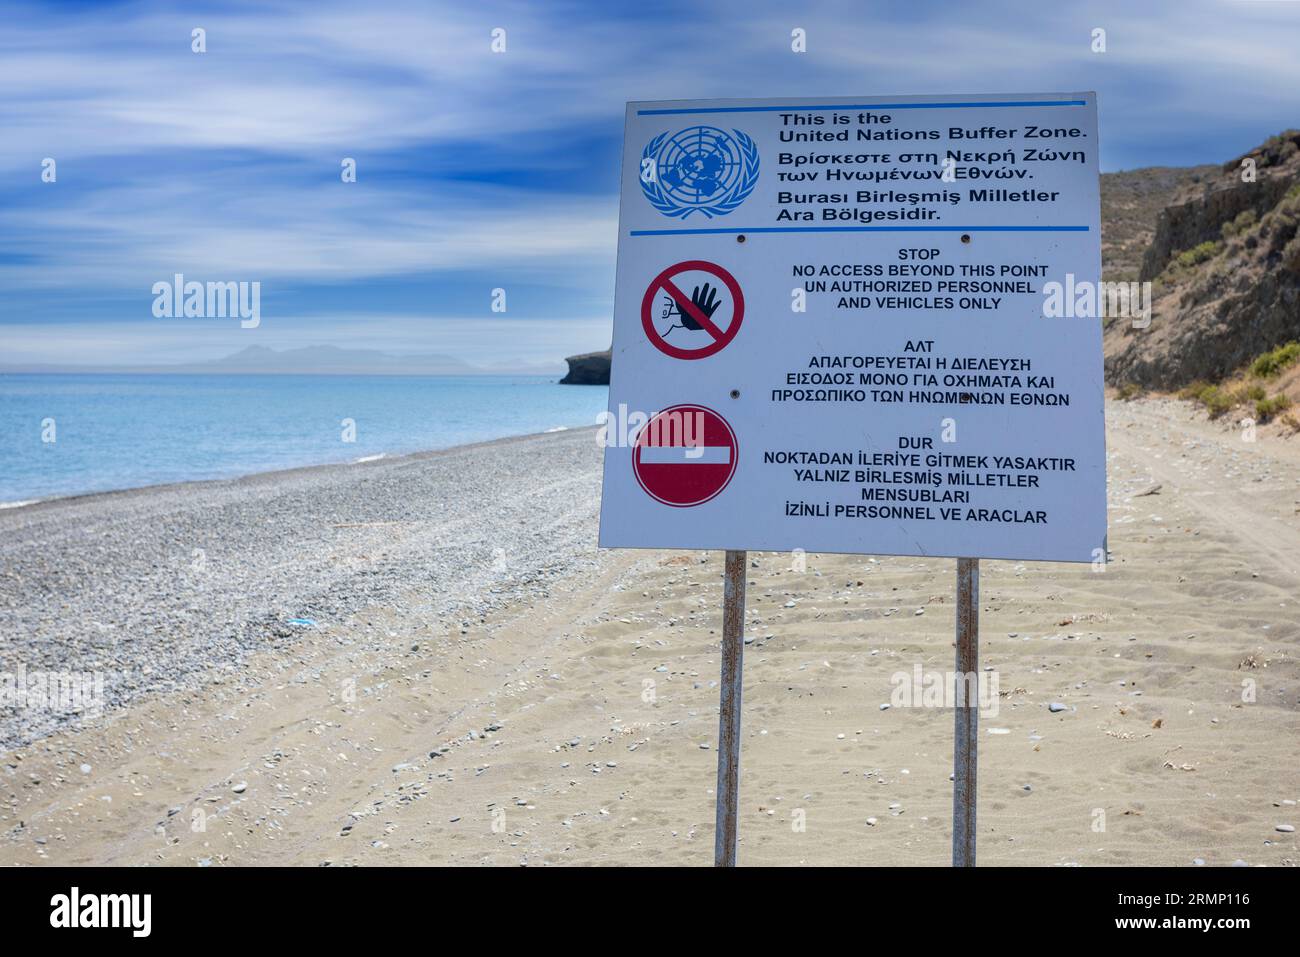 Begining of the united nations buffer zone at Morphu Bay , Cyprus. Stock Photo